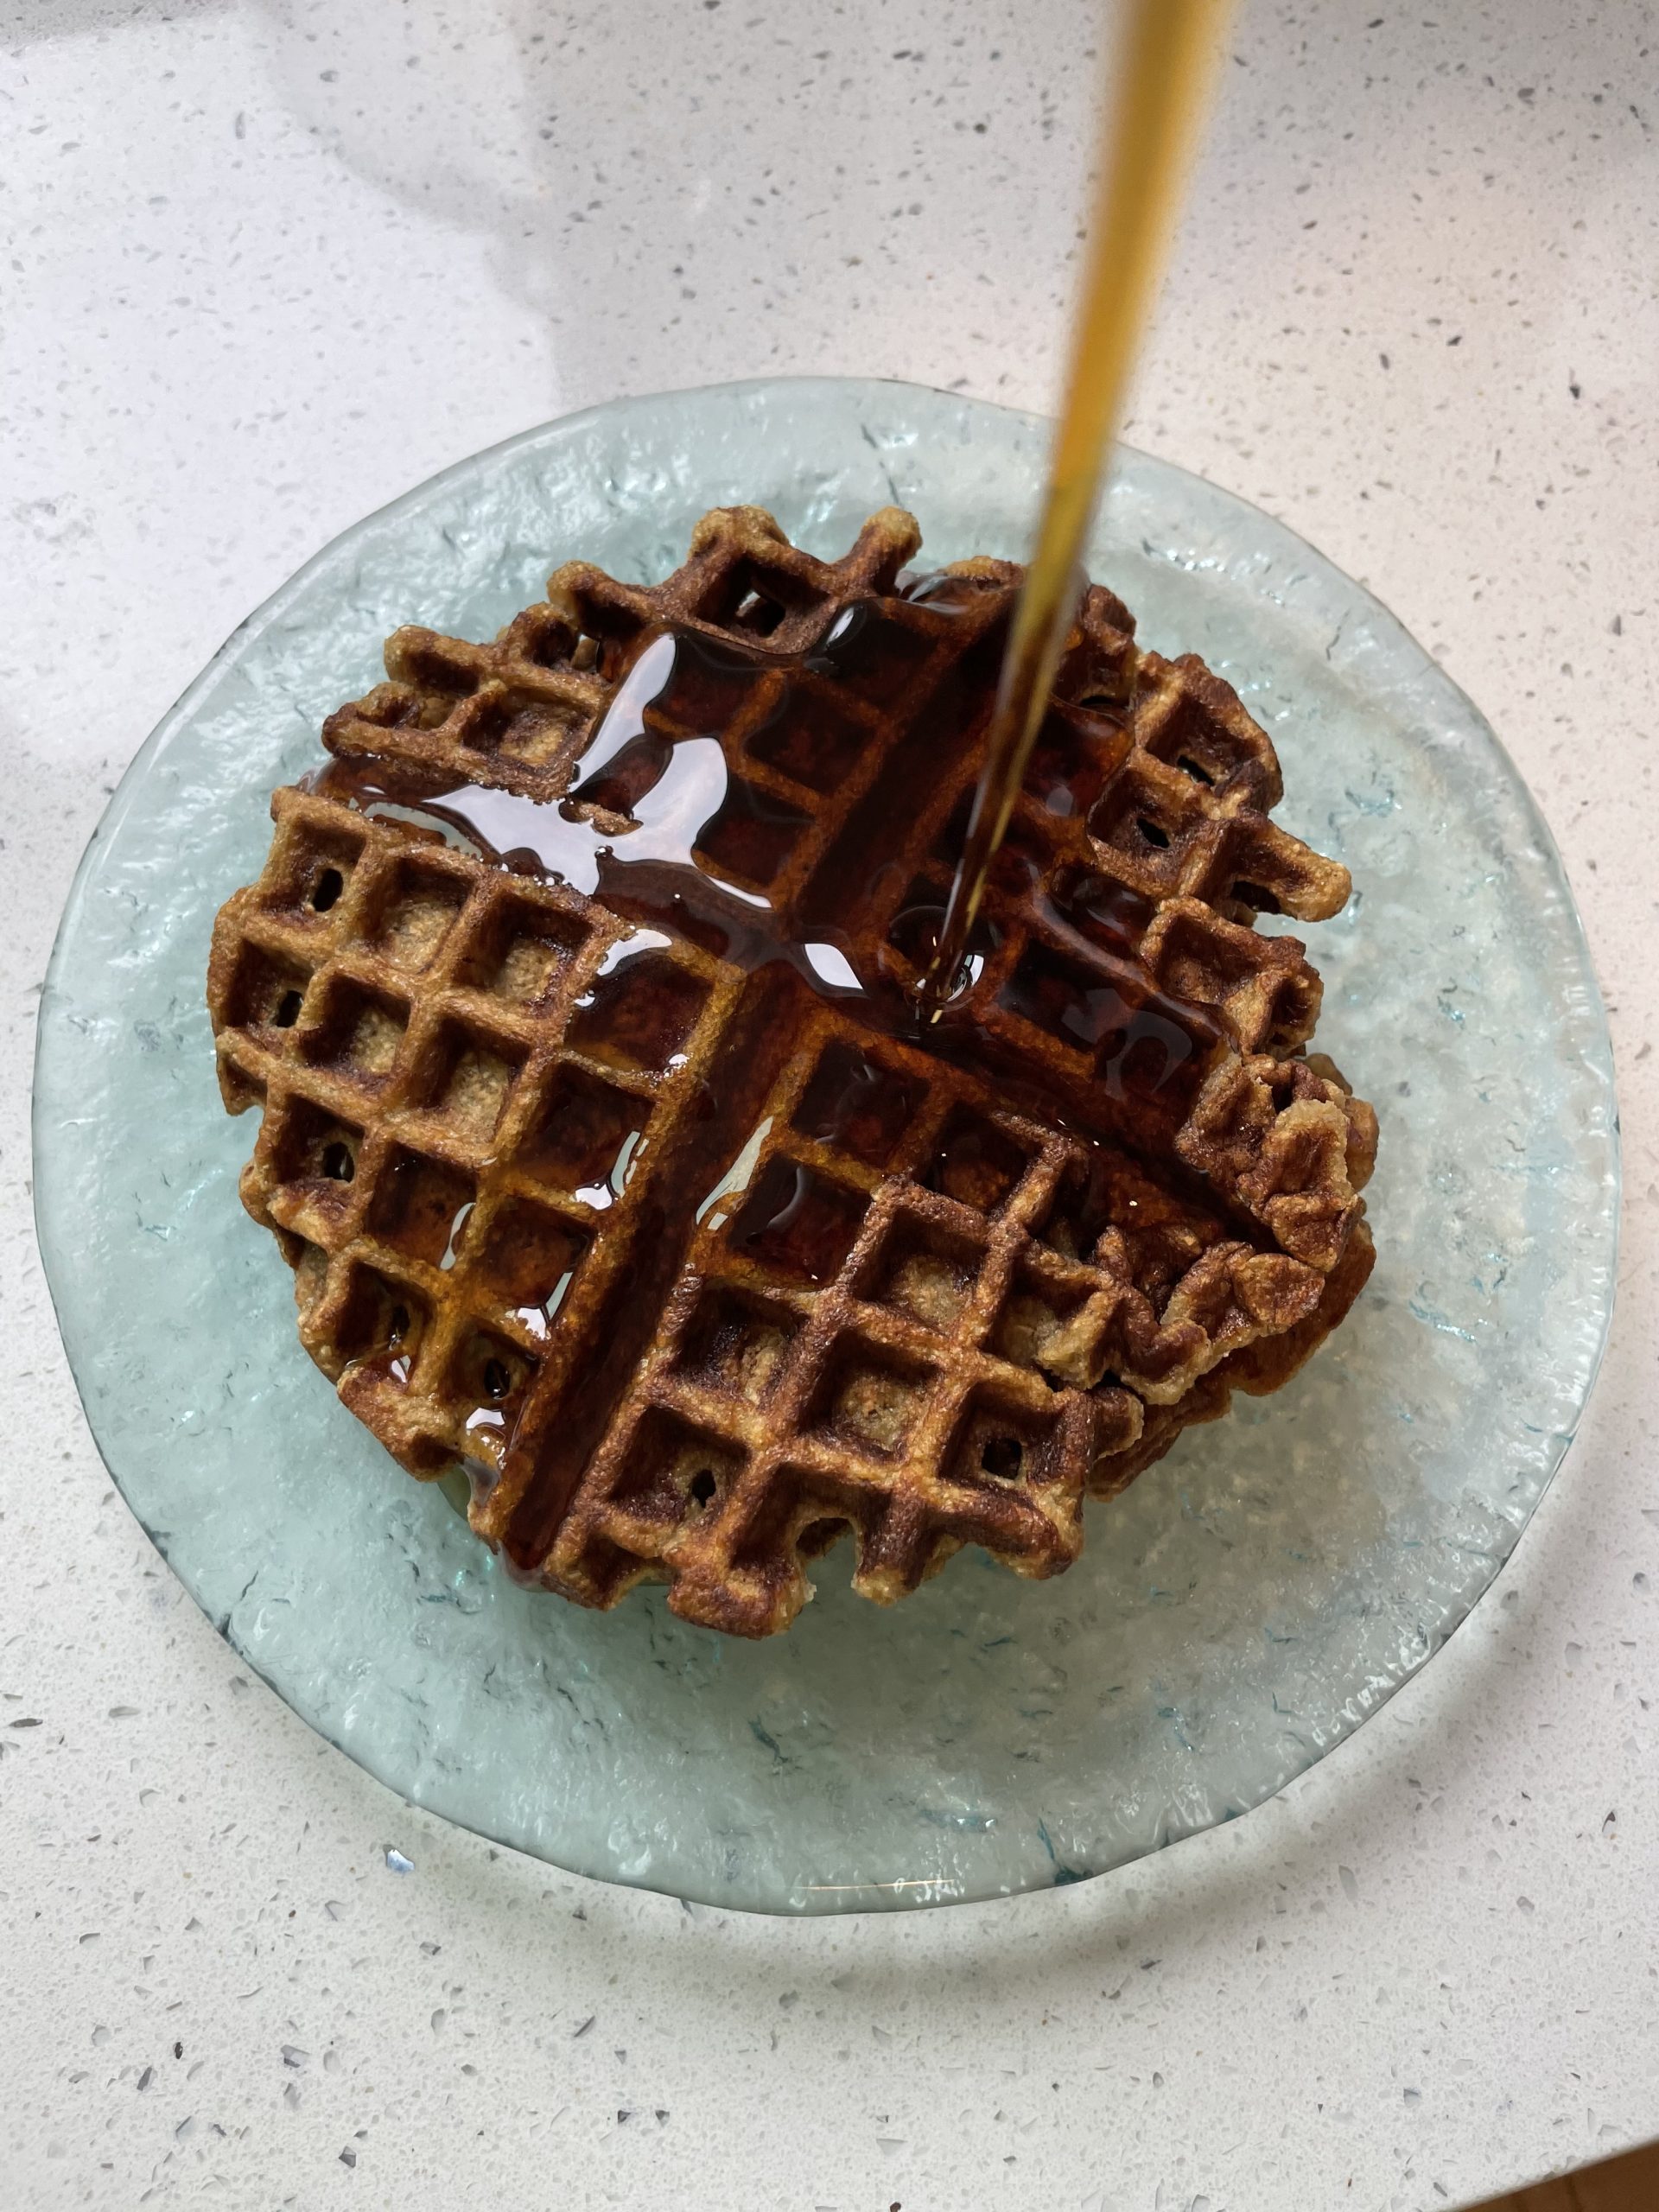 How To Make Healthy Waffles With Dandy Blend